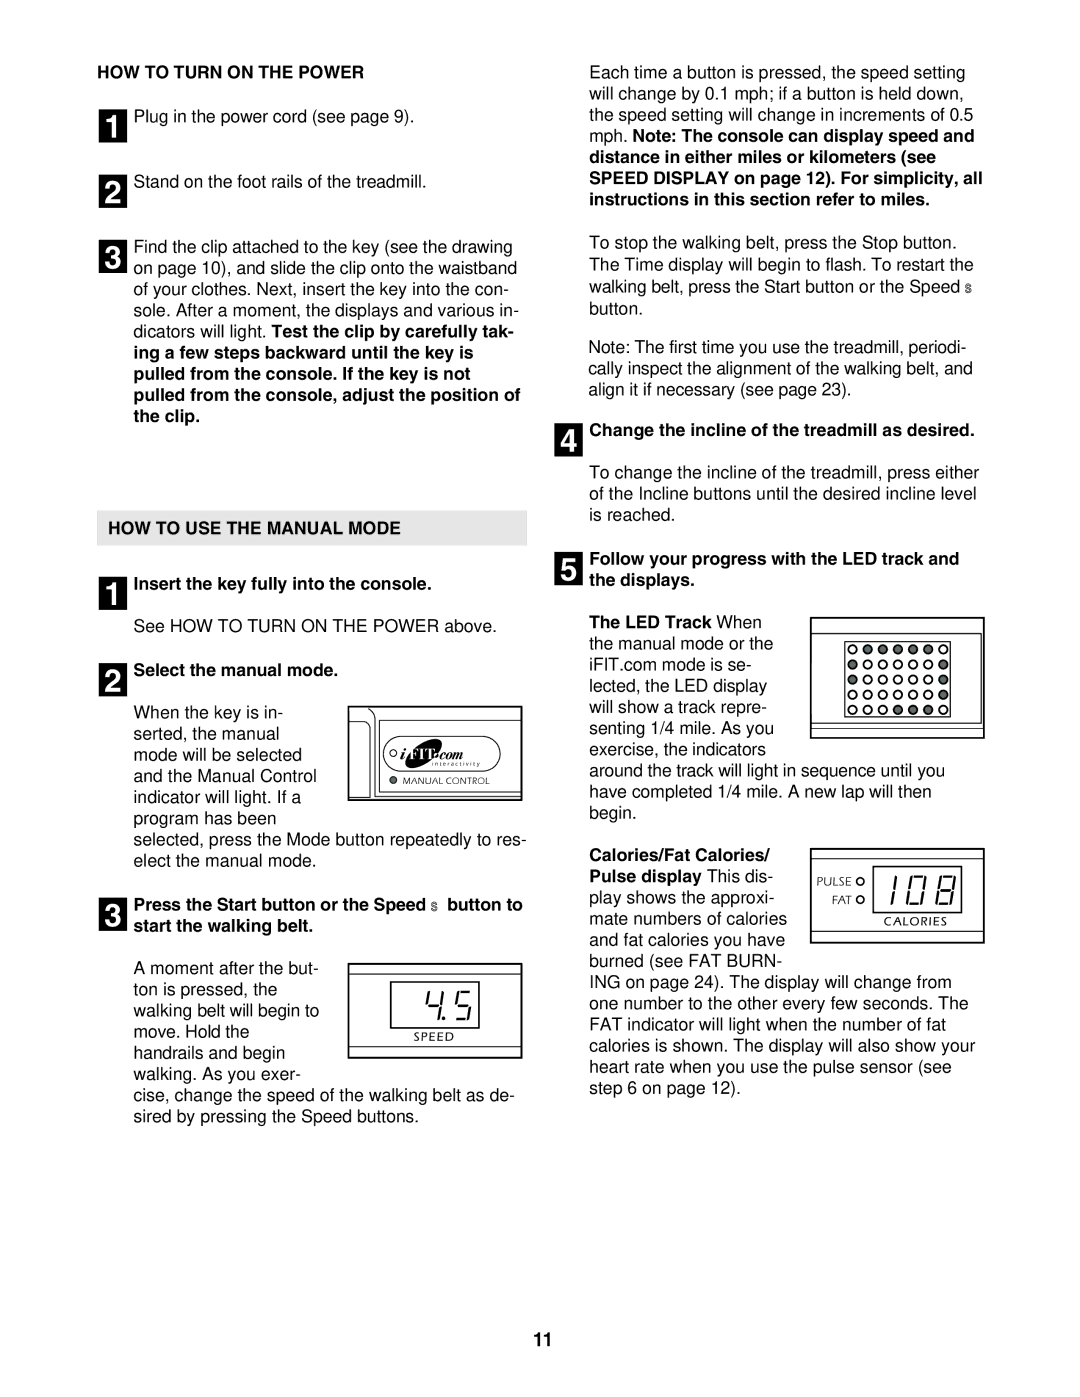 Image IMTL39526 user manual HOW to Turn on the Power, HOW to USE the Manual Mode 